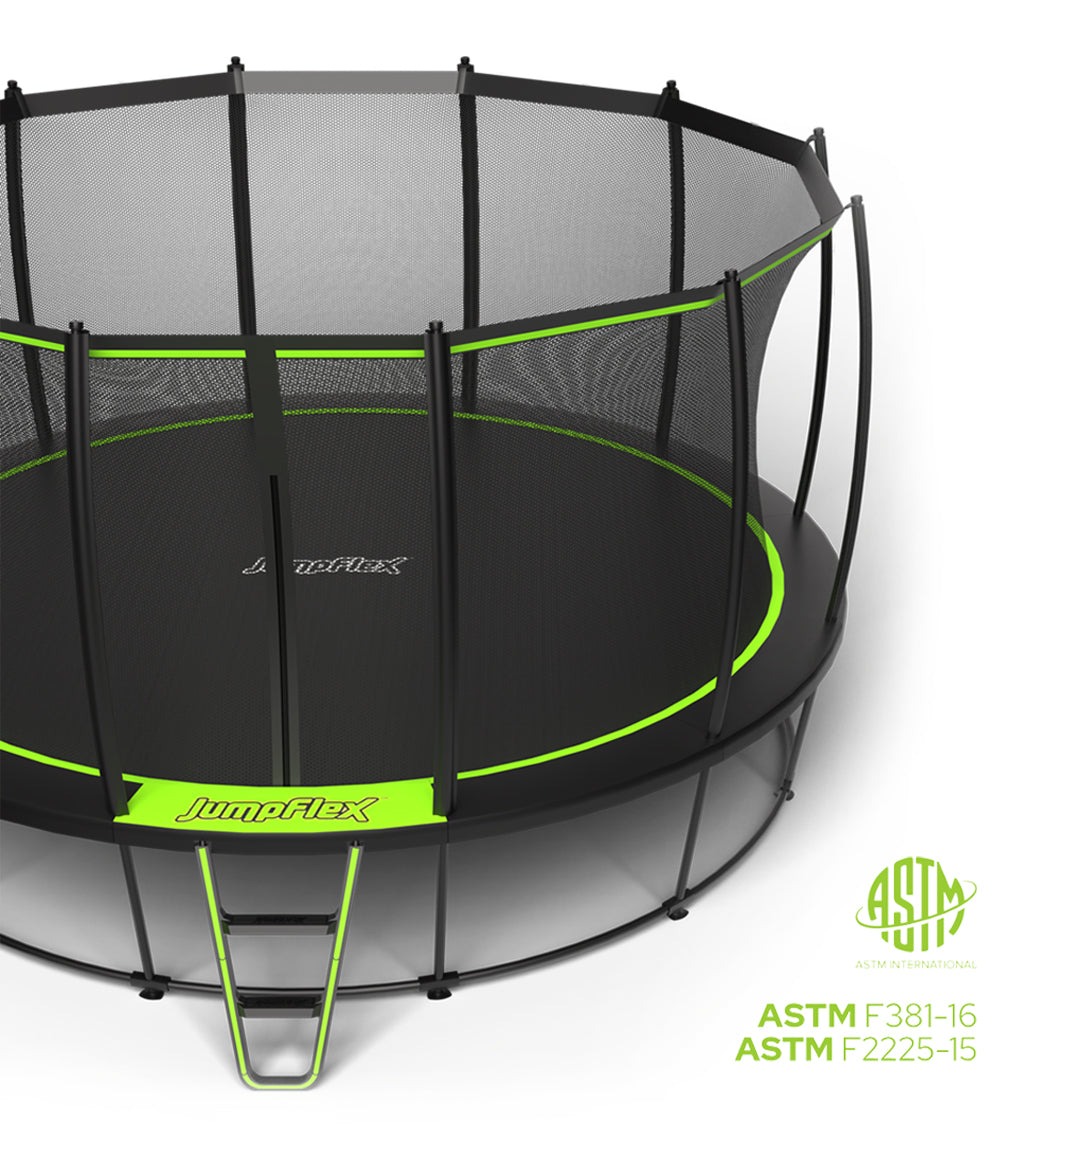 Jumpflex trampolines are designed for safety